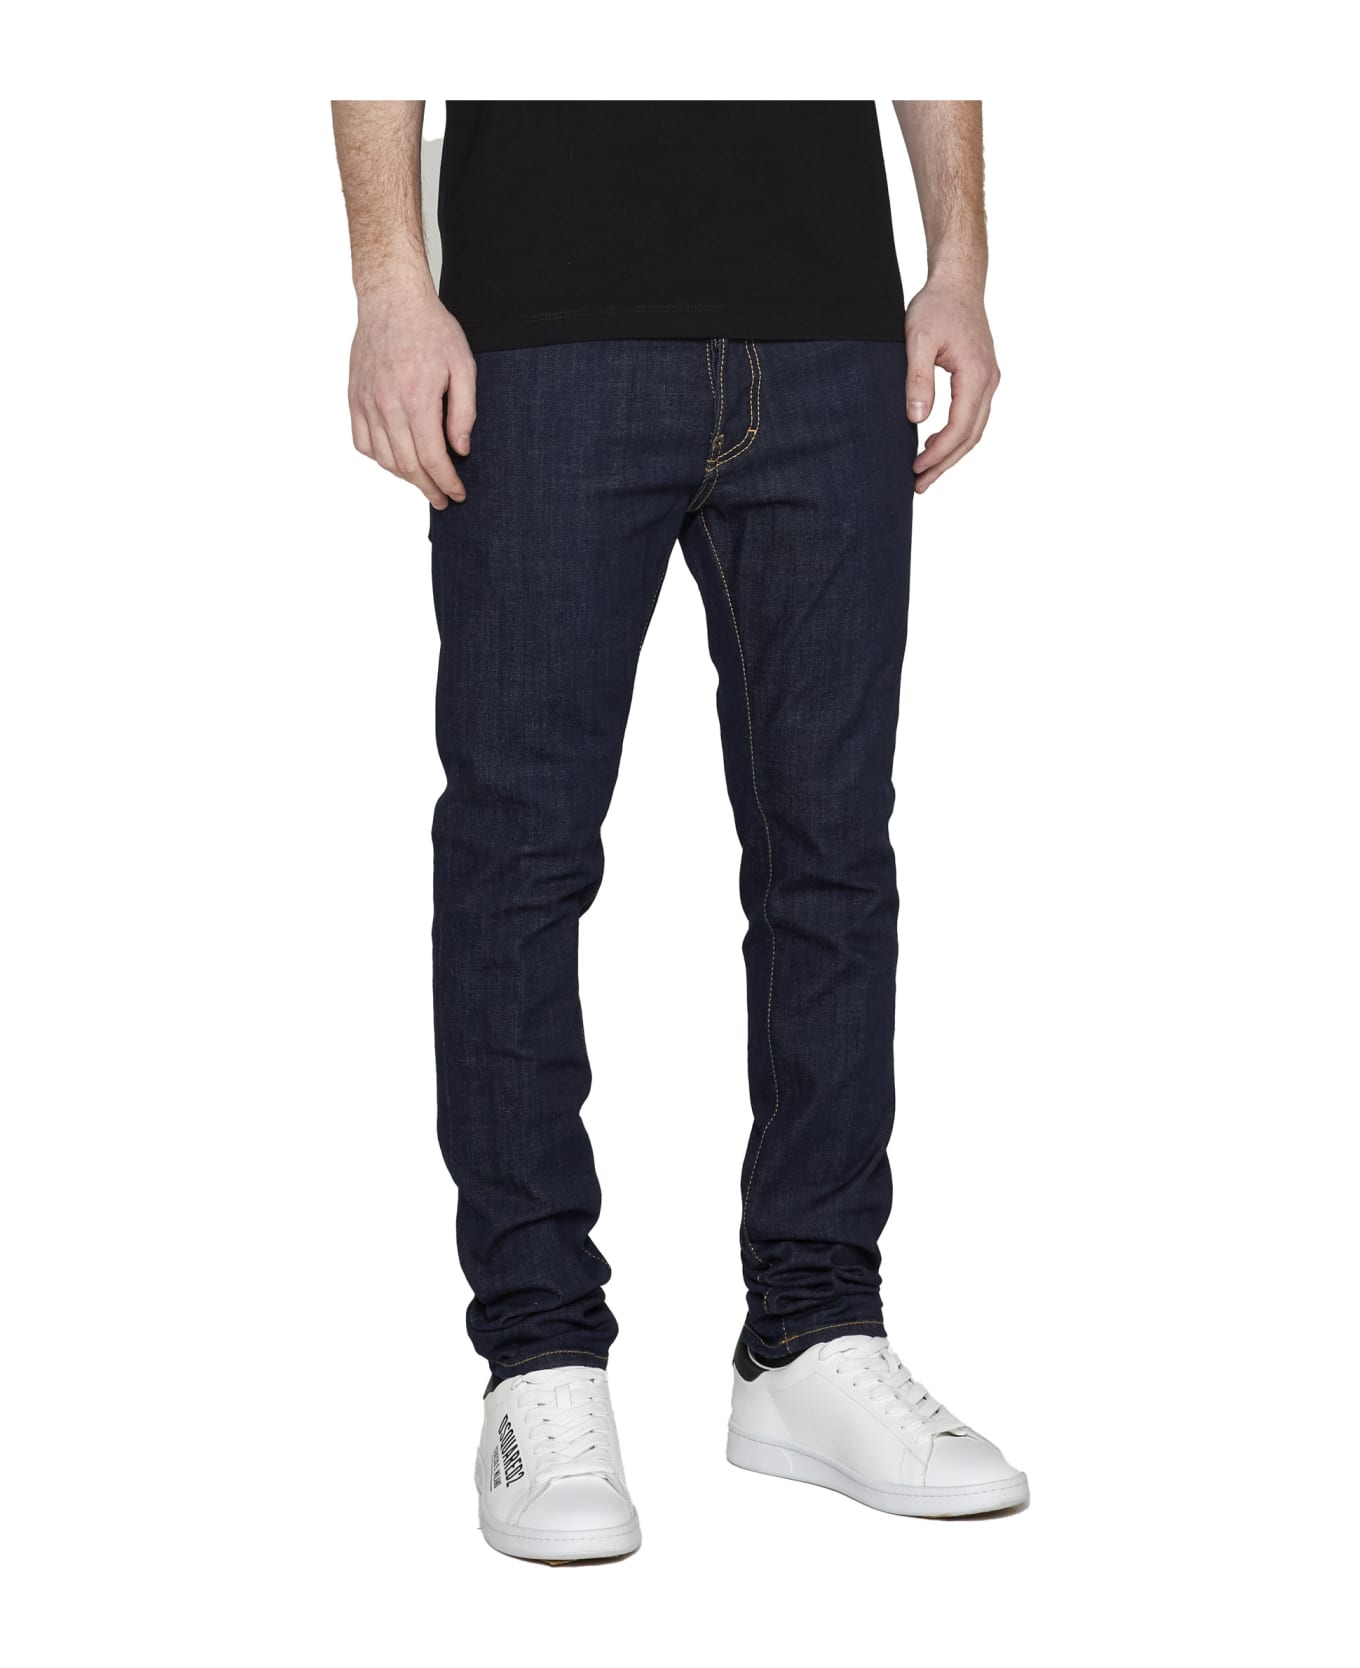 Dsquared2 Cool Guy Jeans In Dark Rinse Wash - Blue Navy